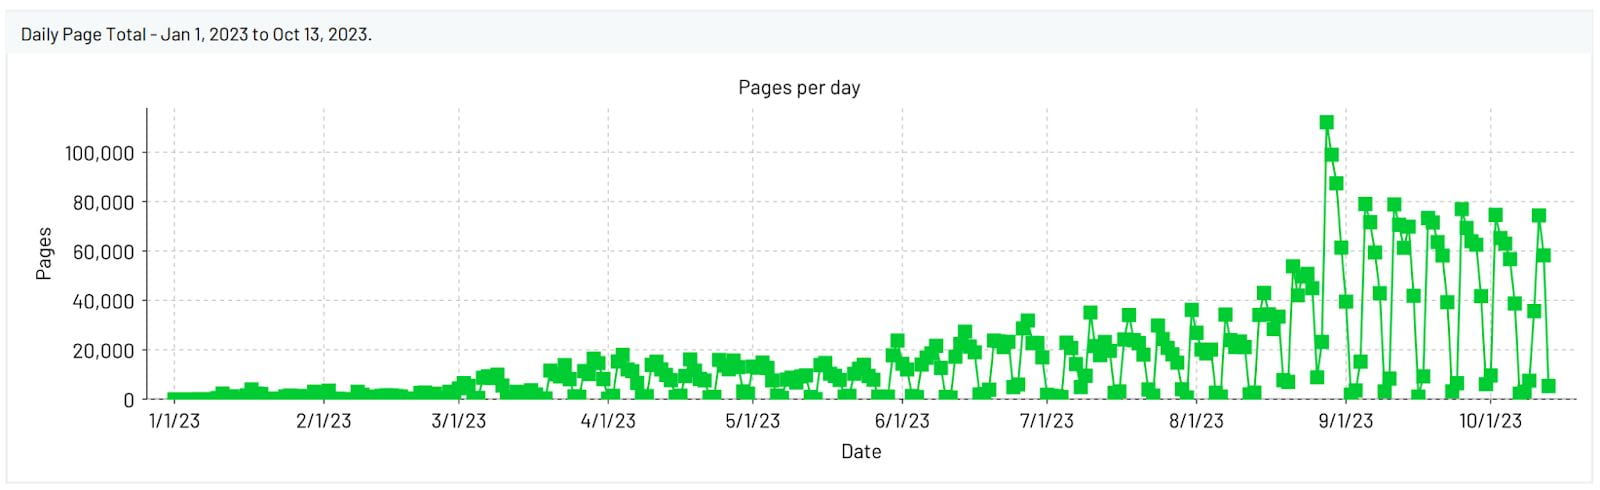 Graph depicting the total number of pages copied per day from January 1, 2023 to October 13, 2023 shows increasing growth over that time period with a spike of 112,119 pages on 8/28/23.